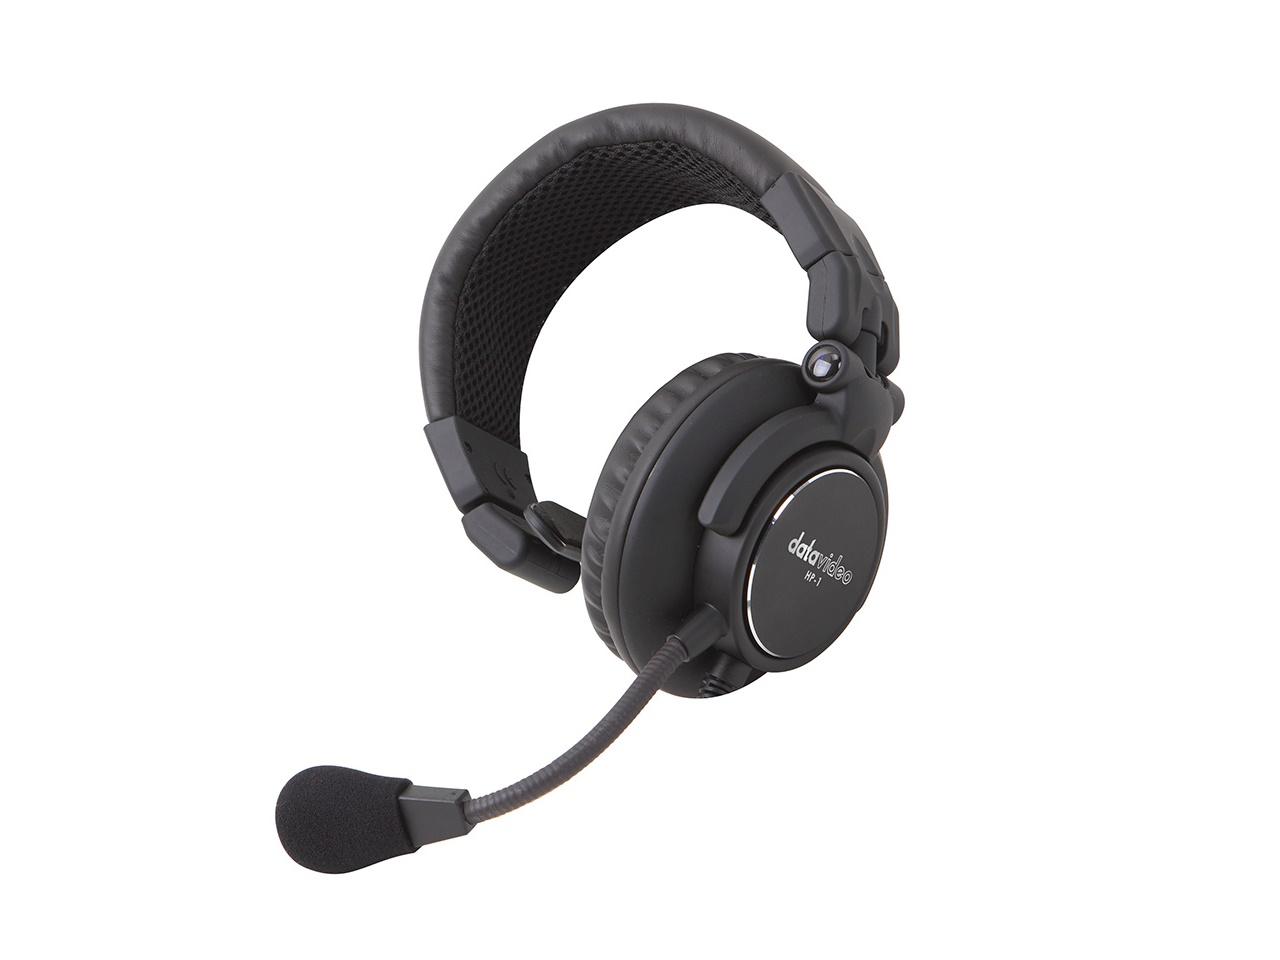 HP1 Single-Ear Headset with Mic for the ITC-100 Belt Packs and Base Station by Datavideo